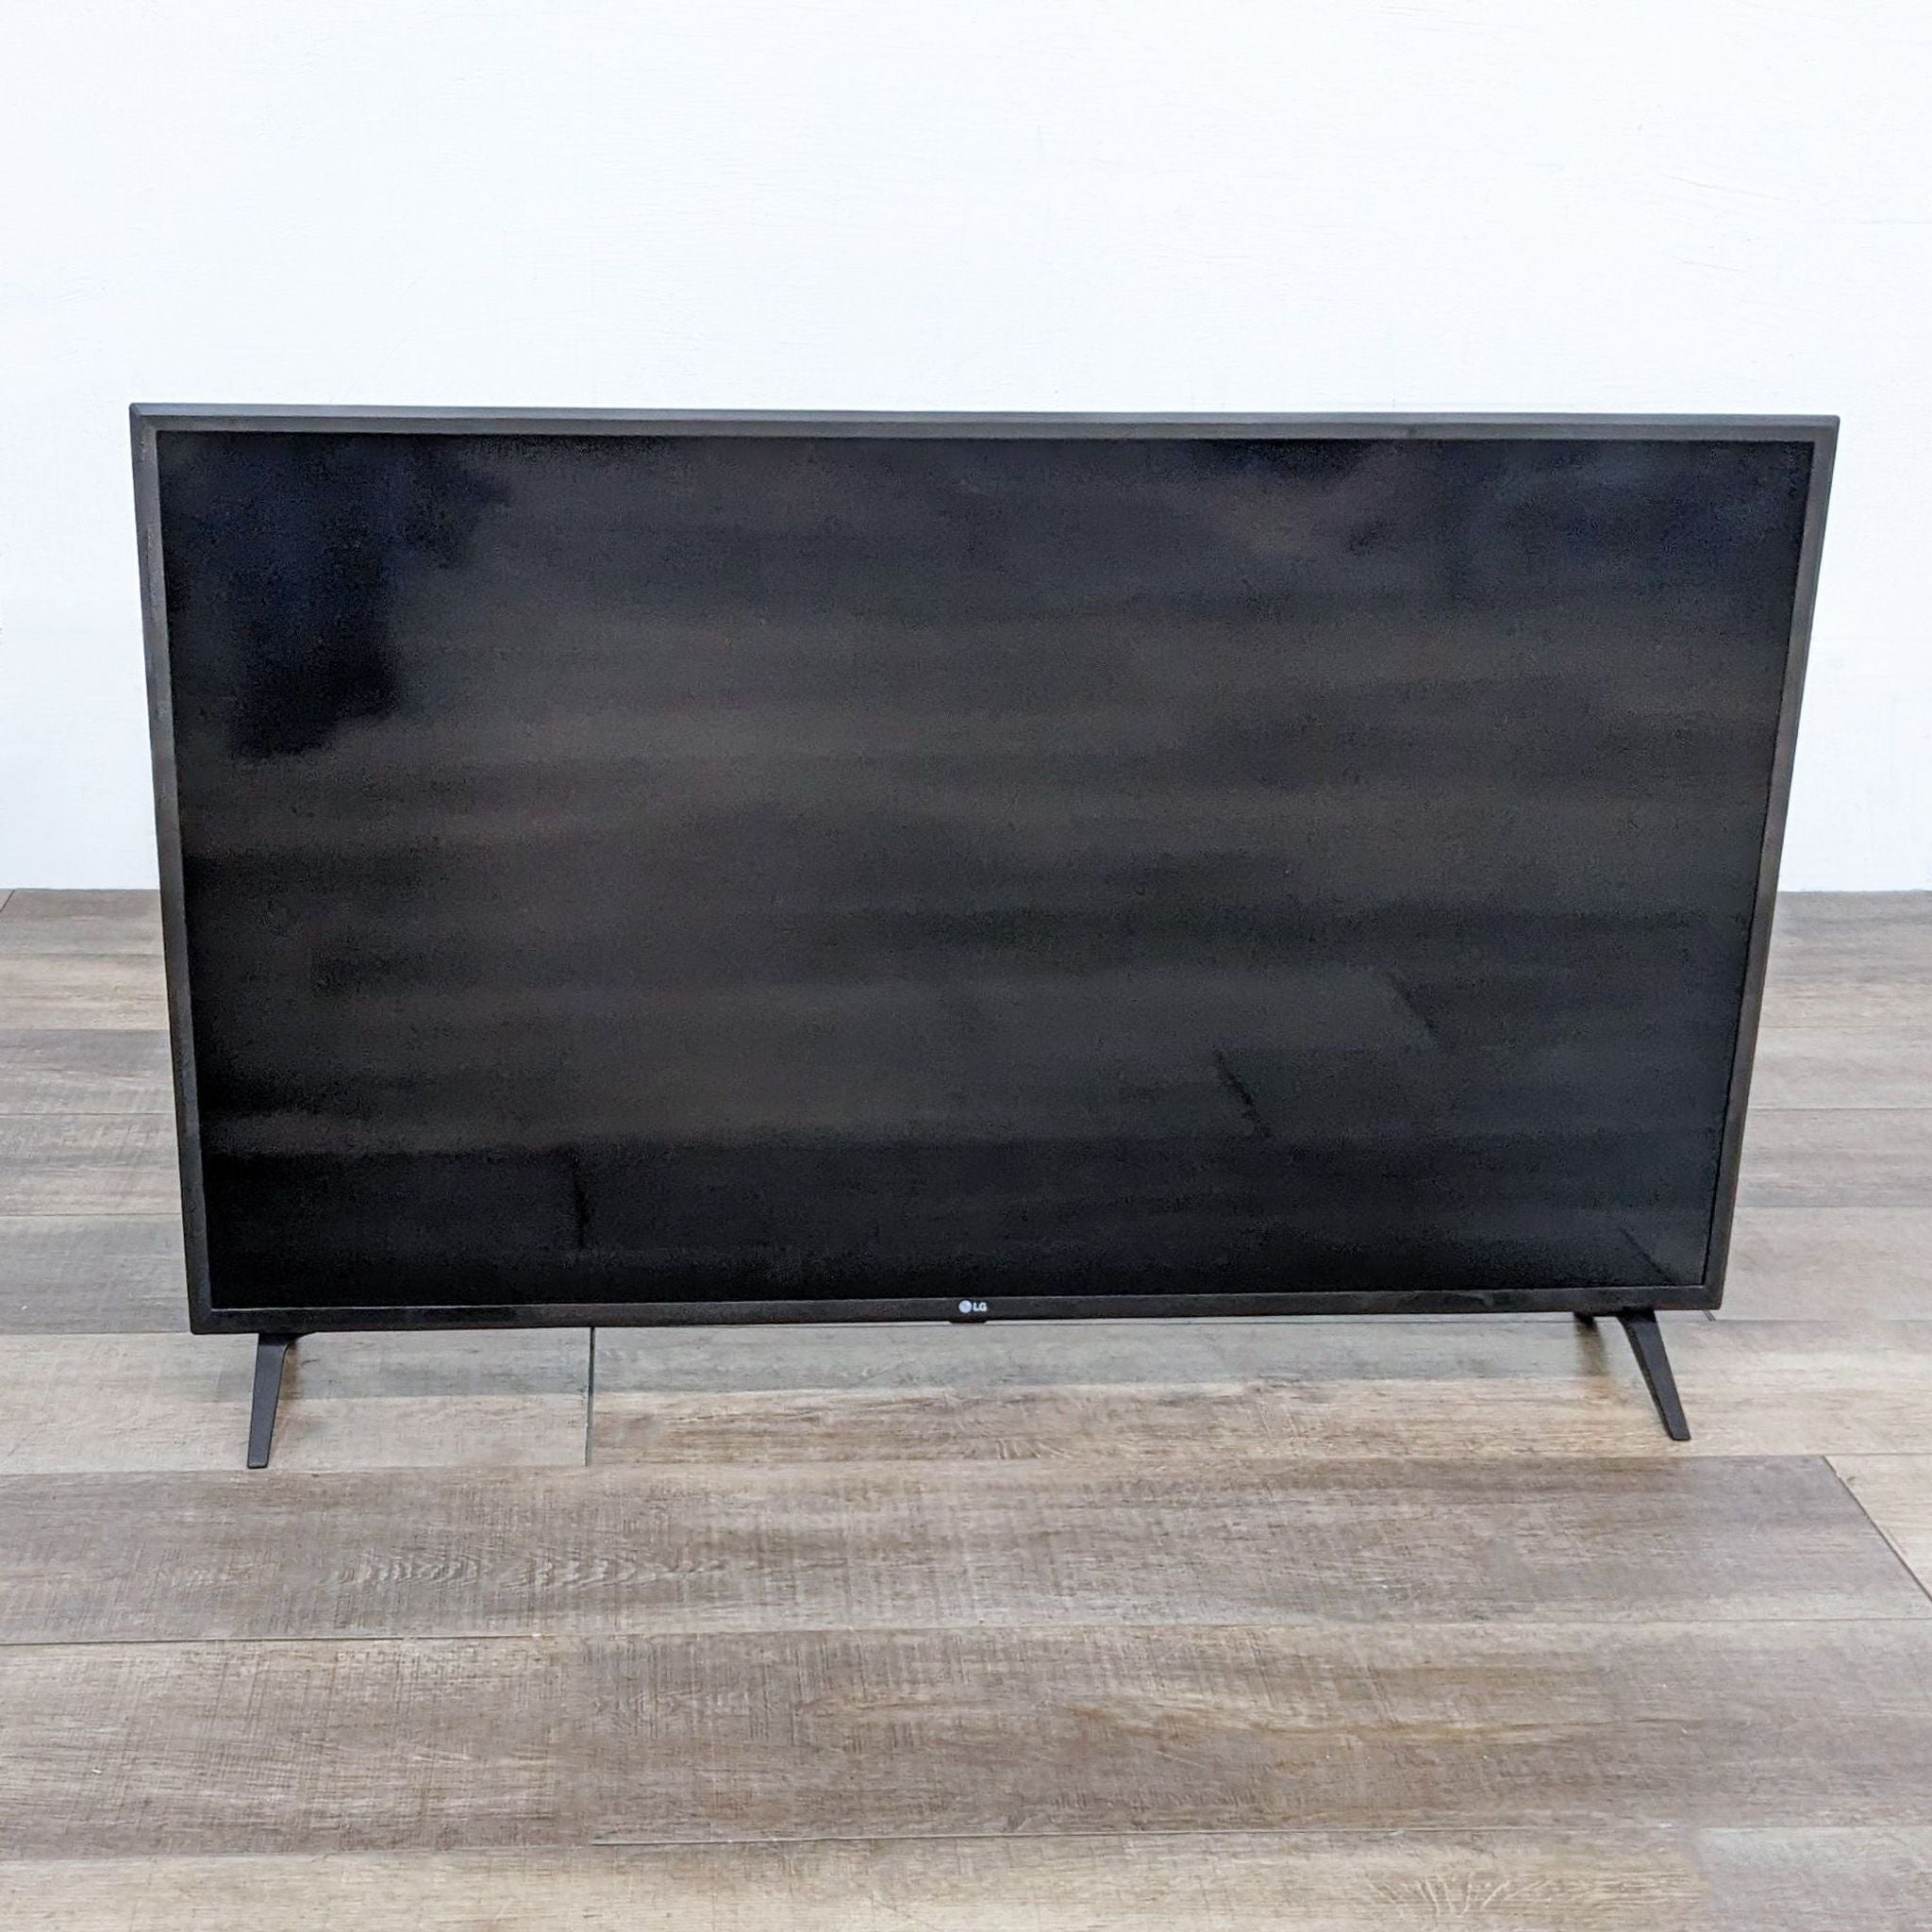 LG brand TV turned off, showing a black screen, on a wooden floor against a white wall.